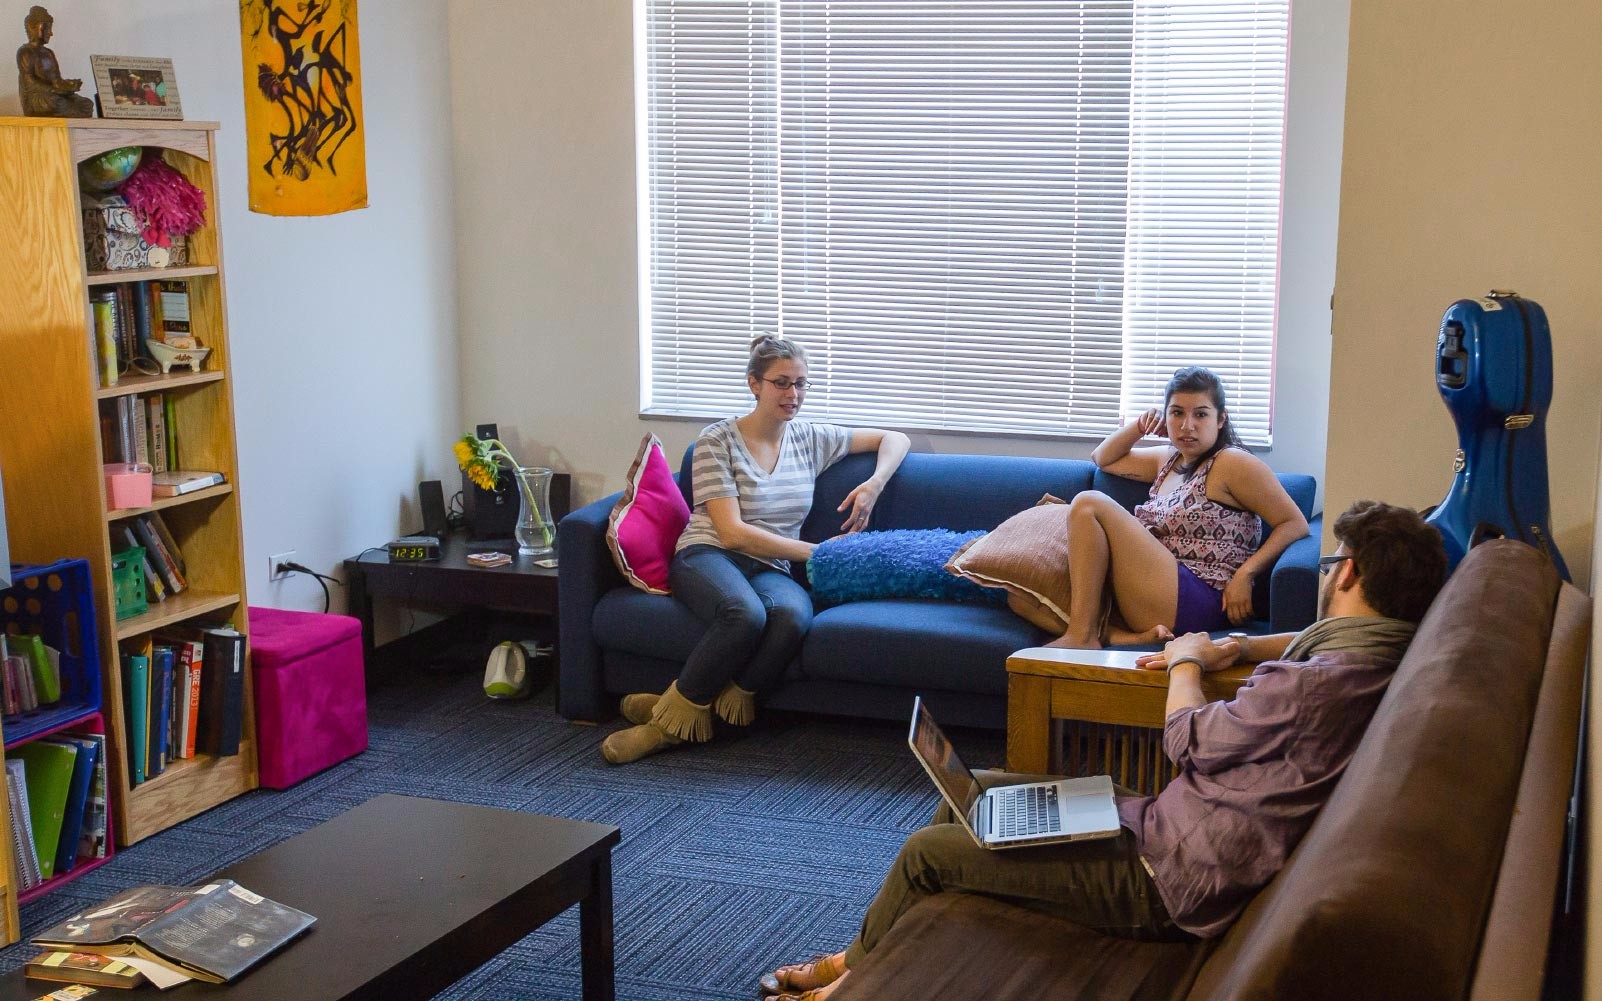 Students lounging in a dorm room.